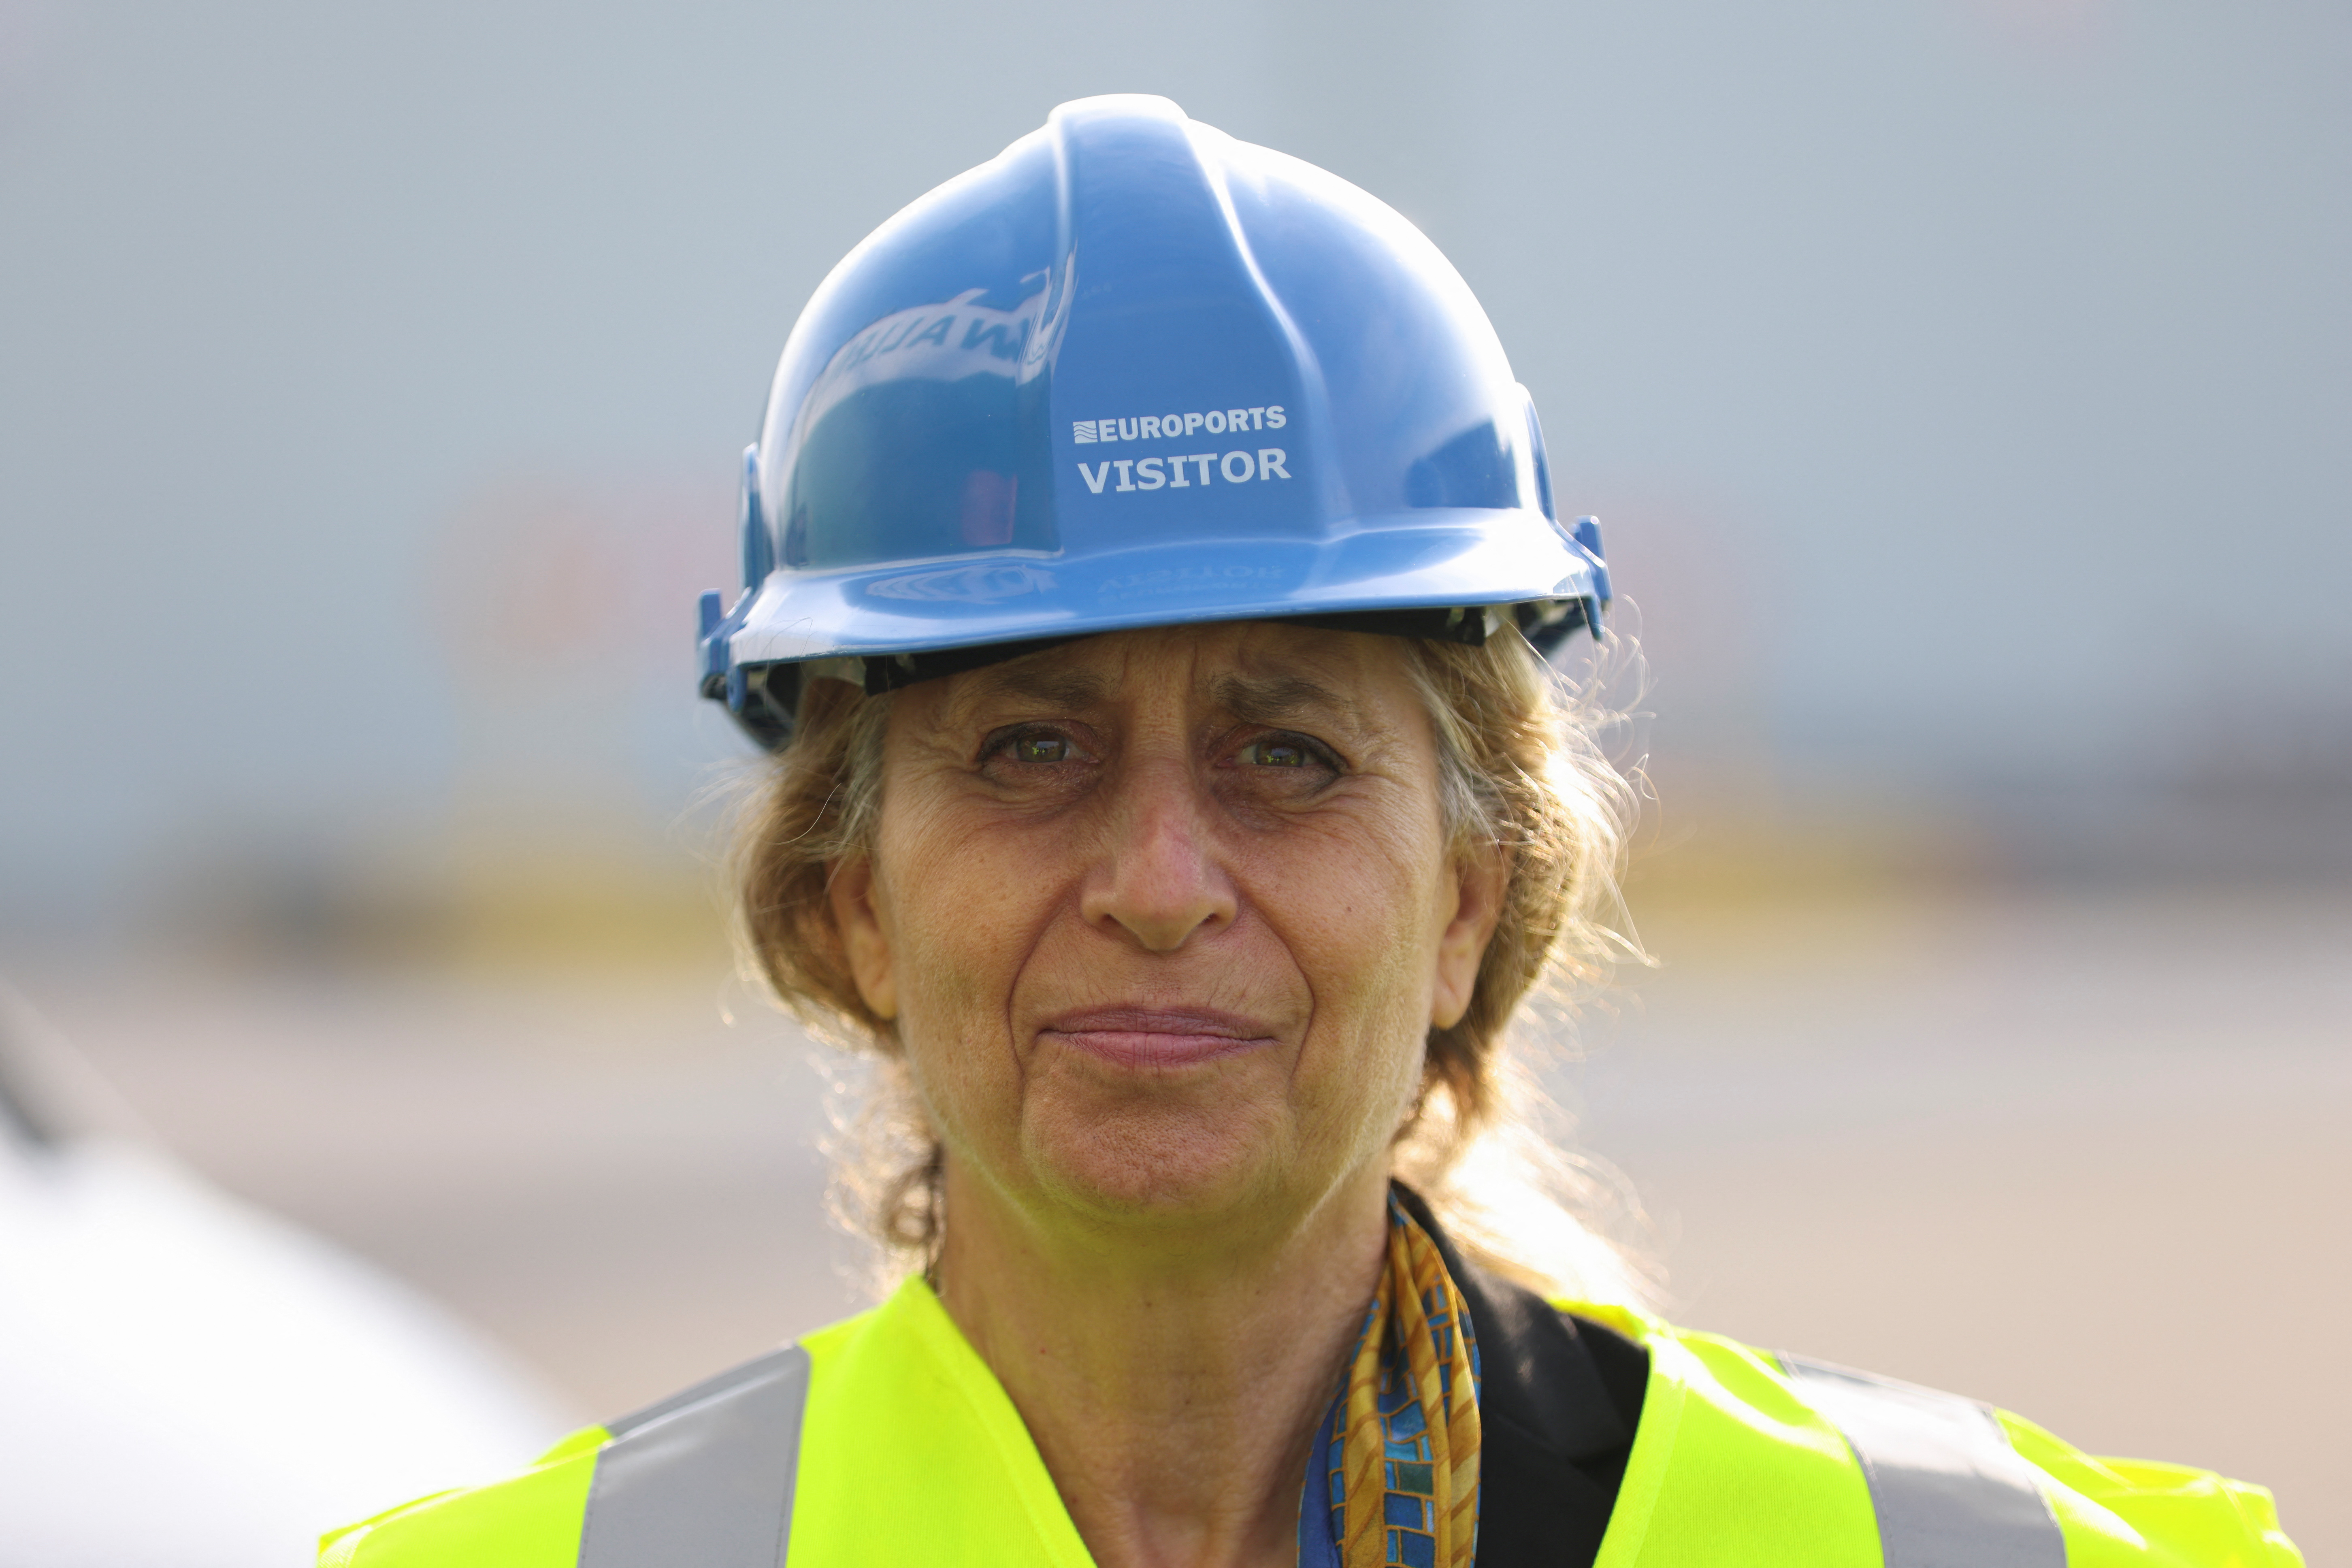 Carol A. Petsonk of U.S. Department of Transportation visits cargo ship set to deliver military supplies to Ukraine, in Antwerp